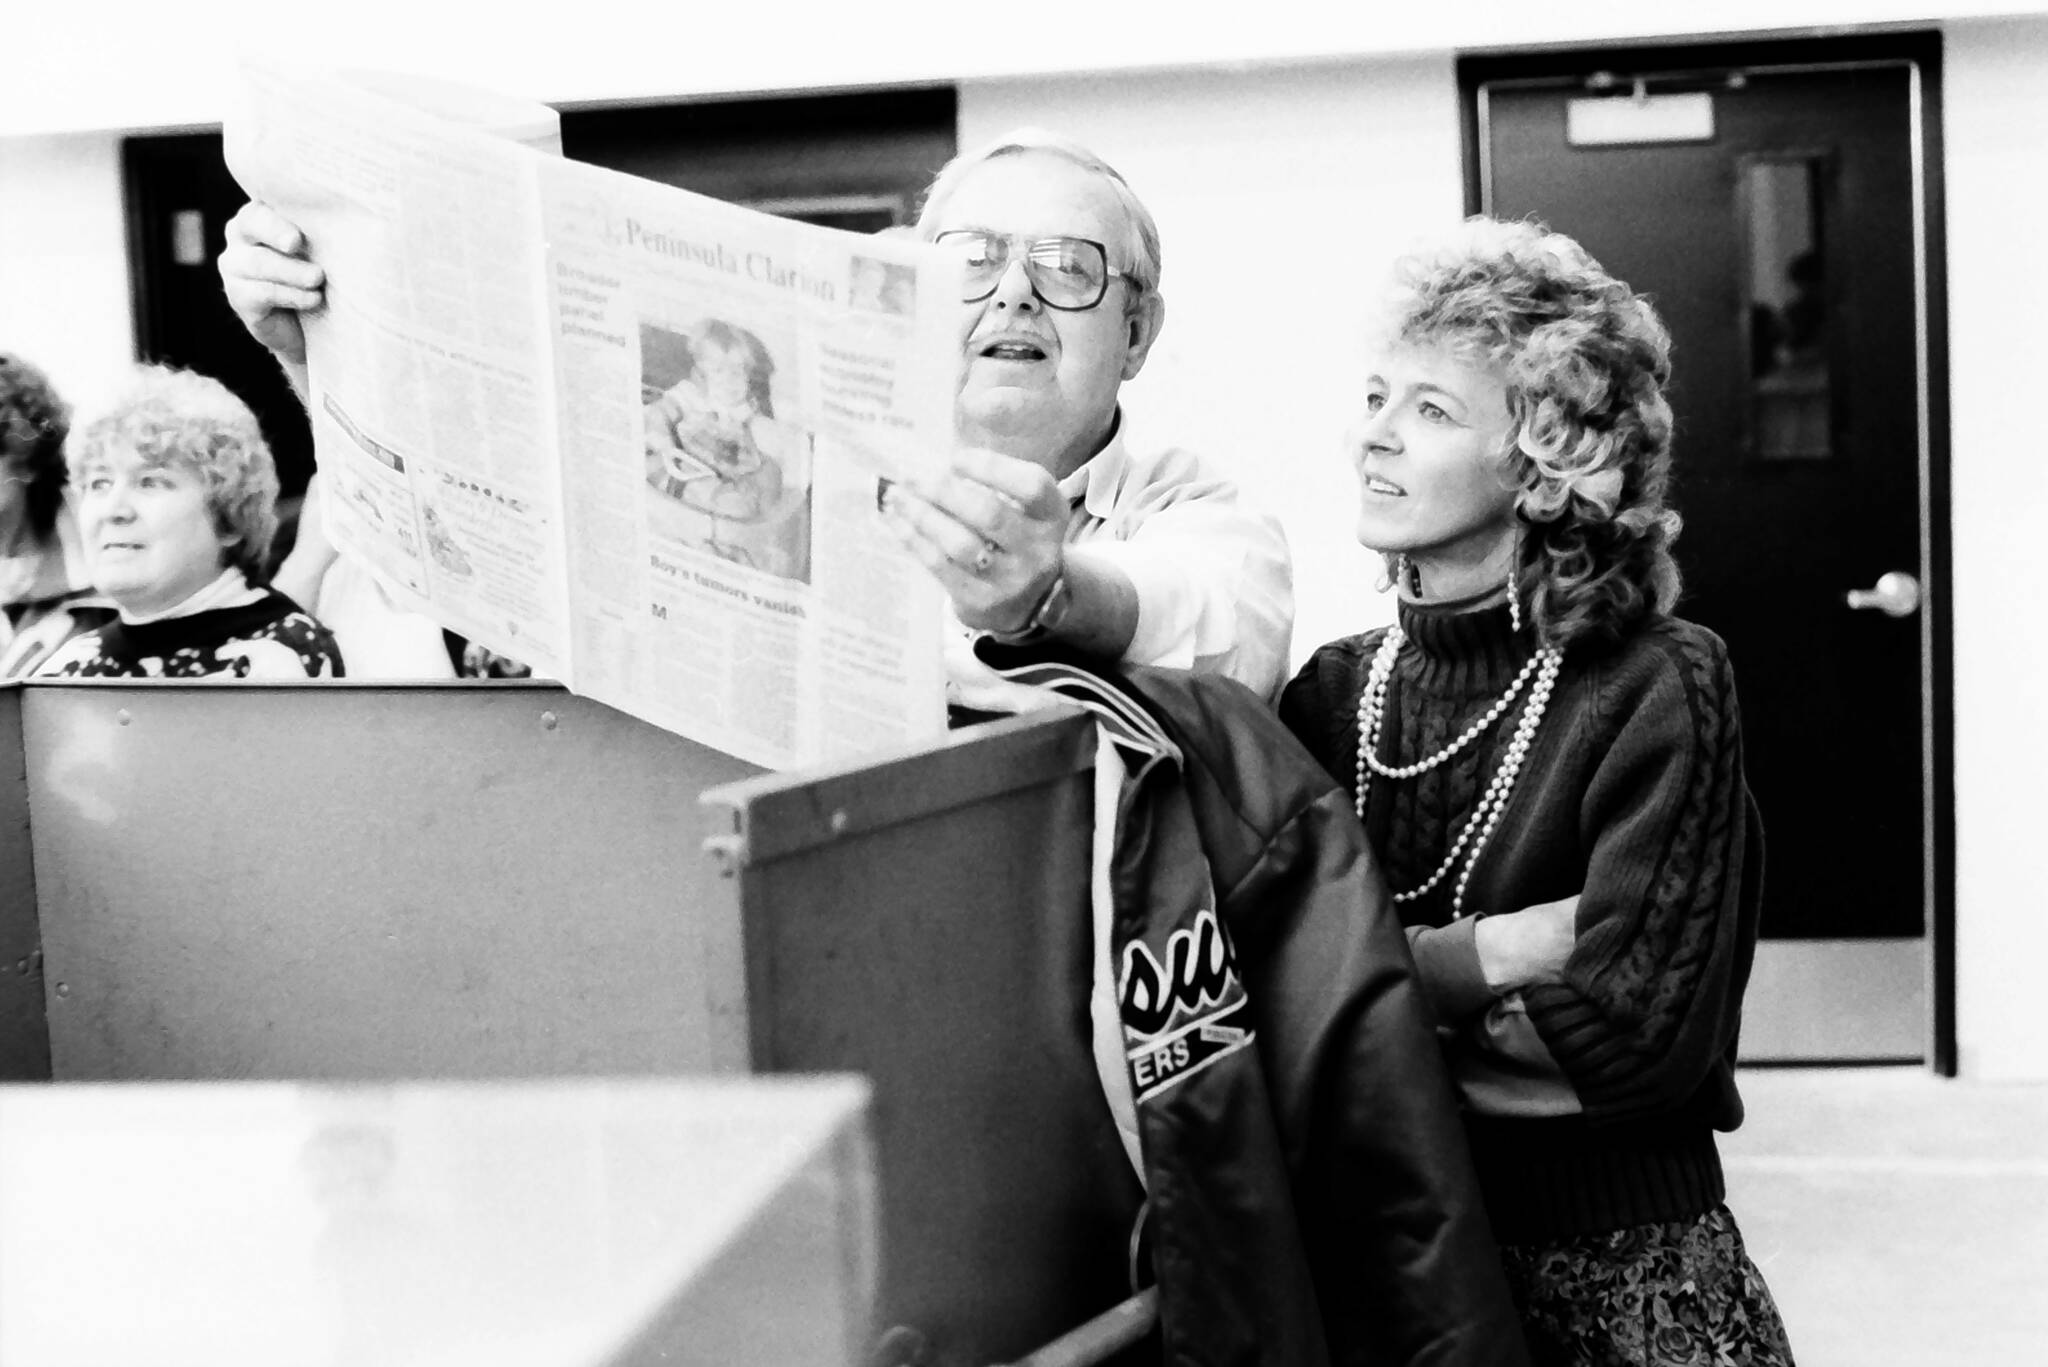 Former Clarion owner Wayne Dunworth examines one of the first issues of the Clarion printed on the Goss Suburban at an opening event in December 1992, in the Peninsula Clarion pressroom in Kenai, Alaska. (Roy Shapley/Peninsula Clarion)